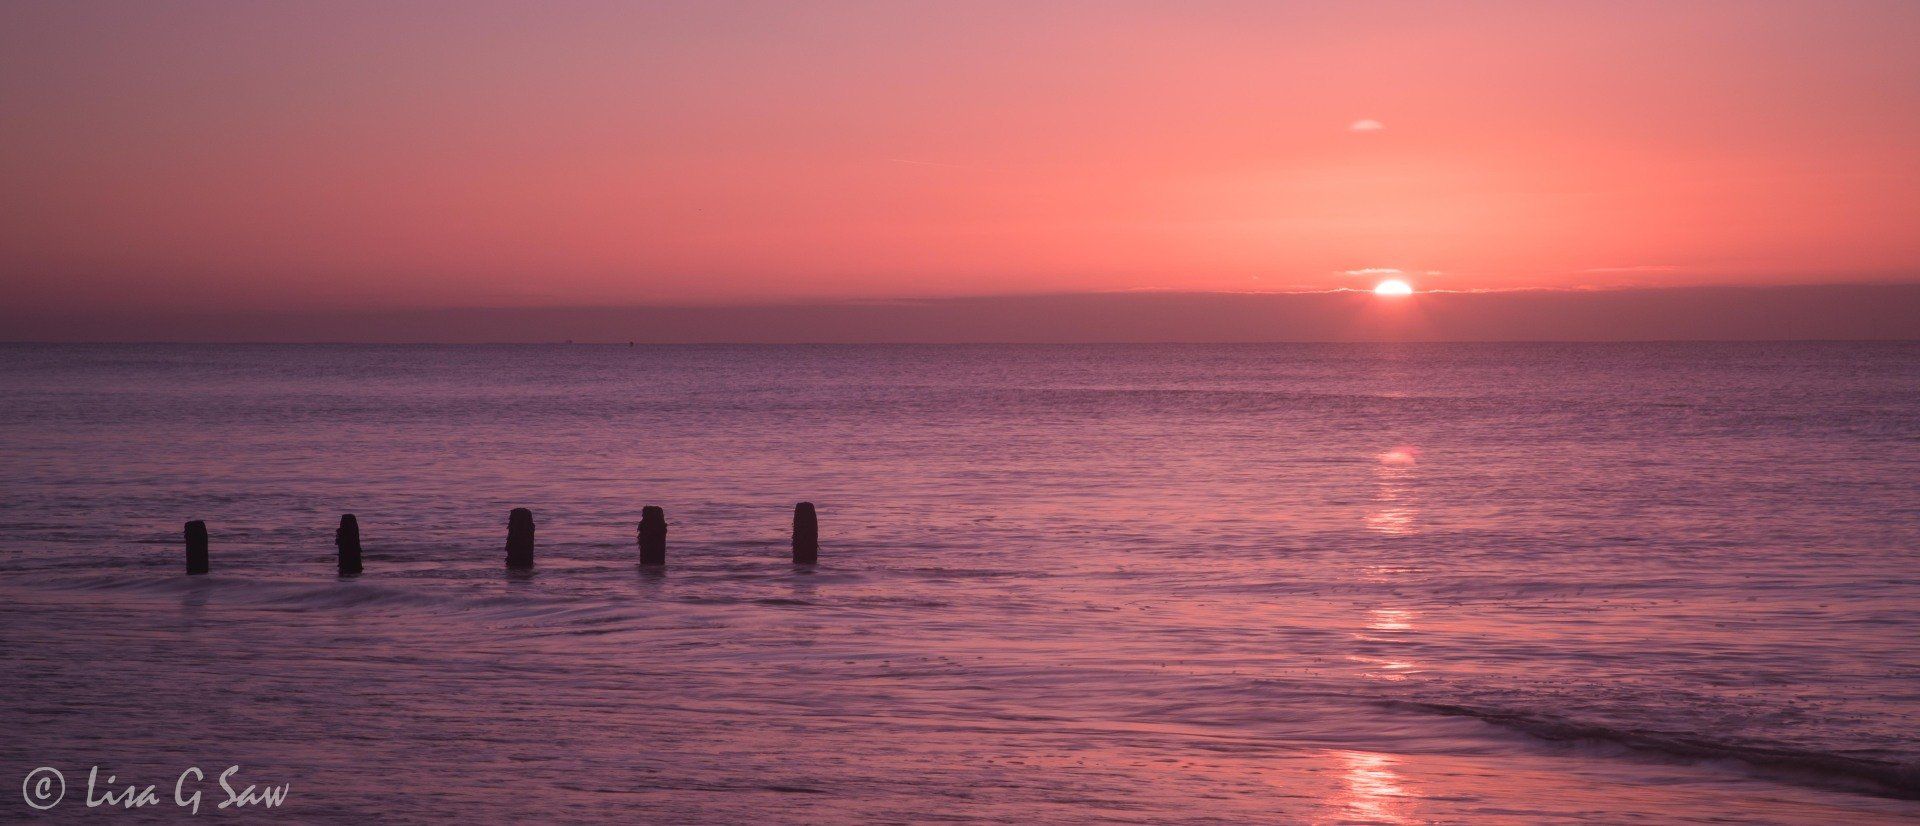 Sunrise over the sea and wooden posts, Worthing